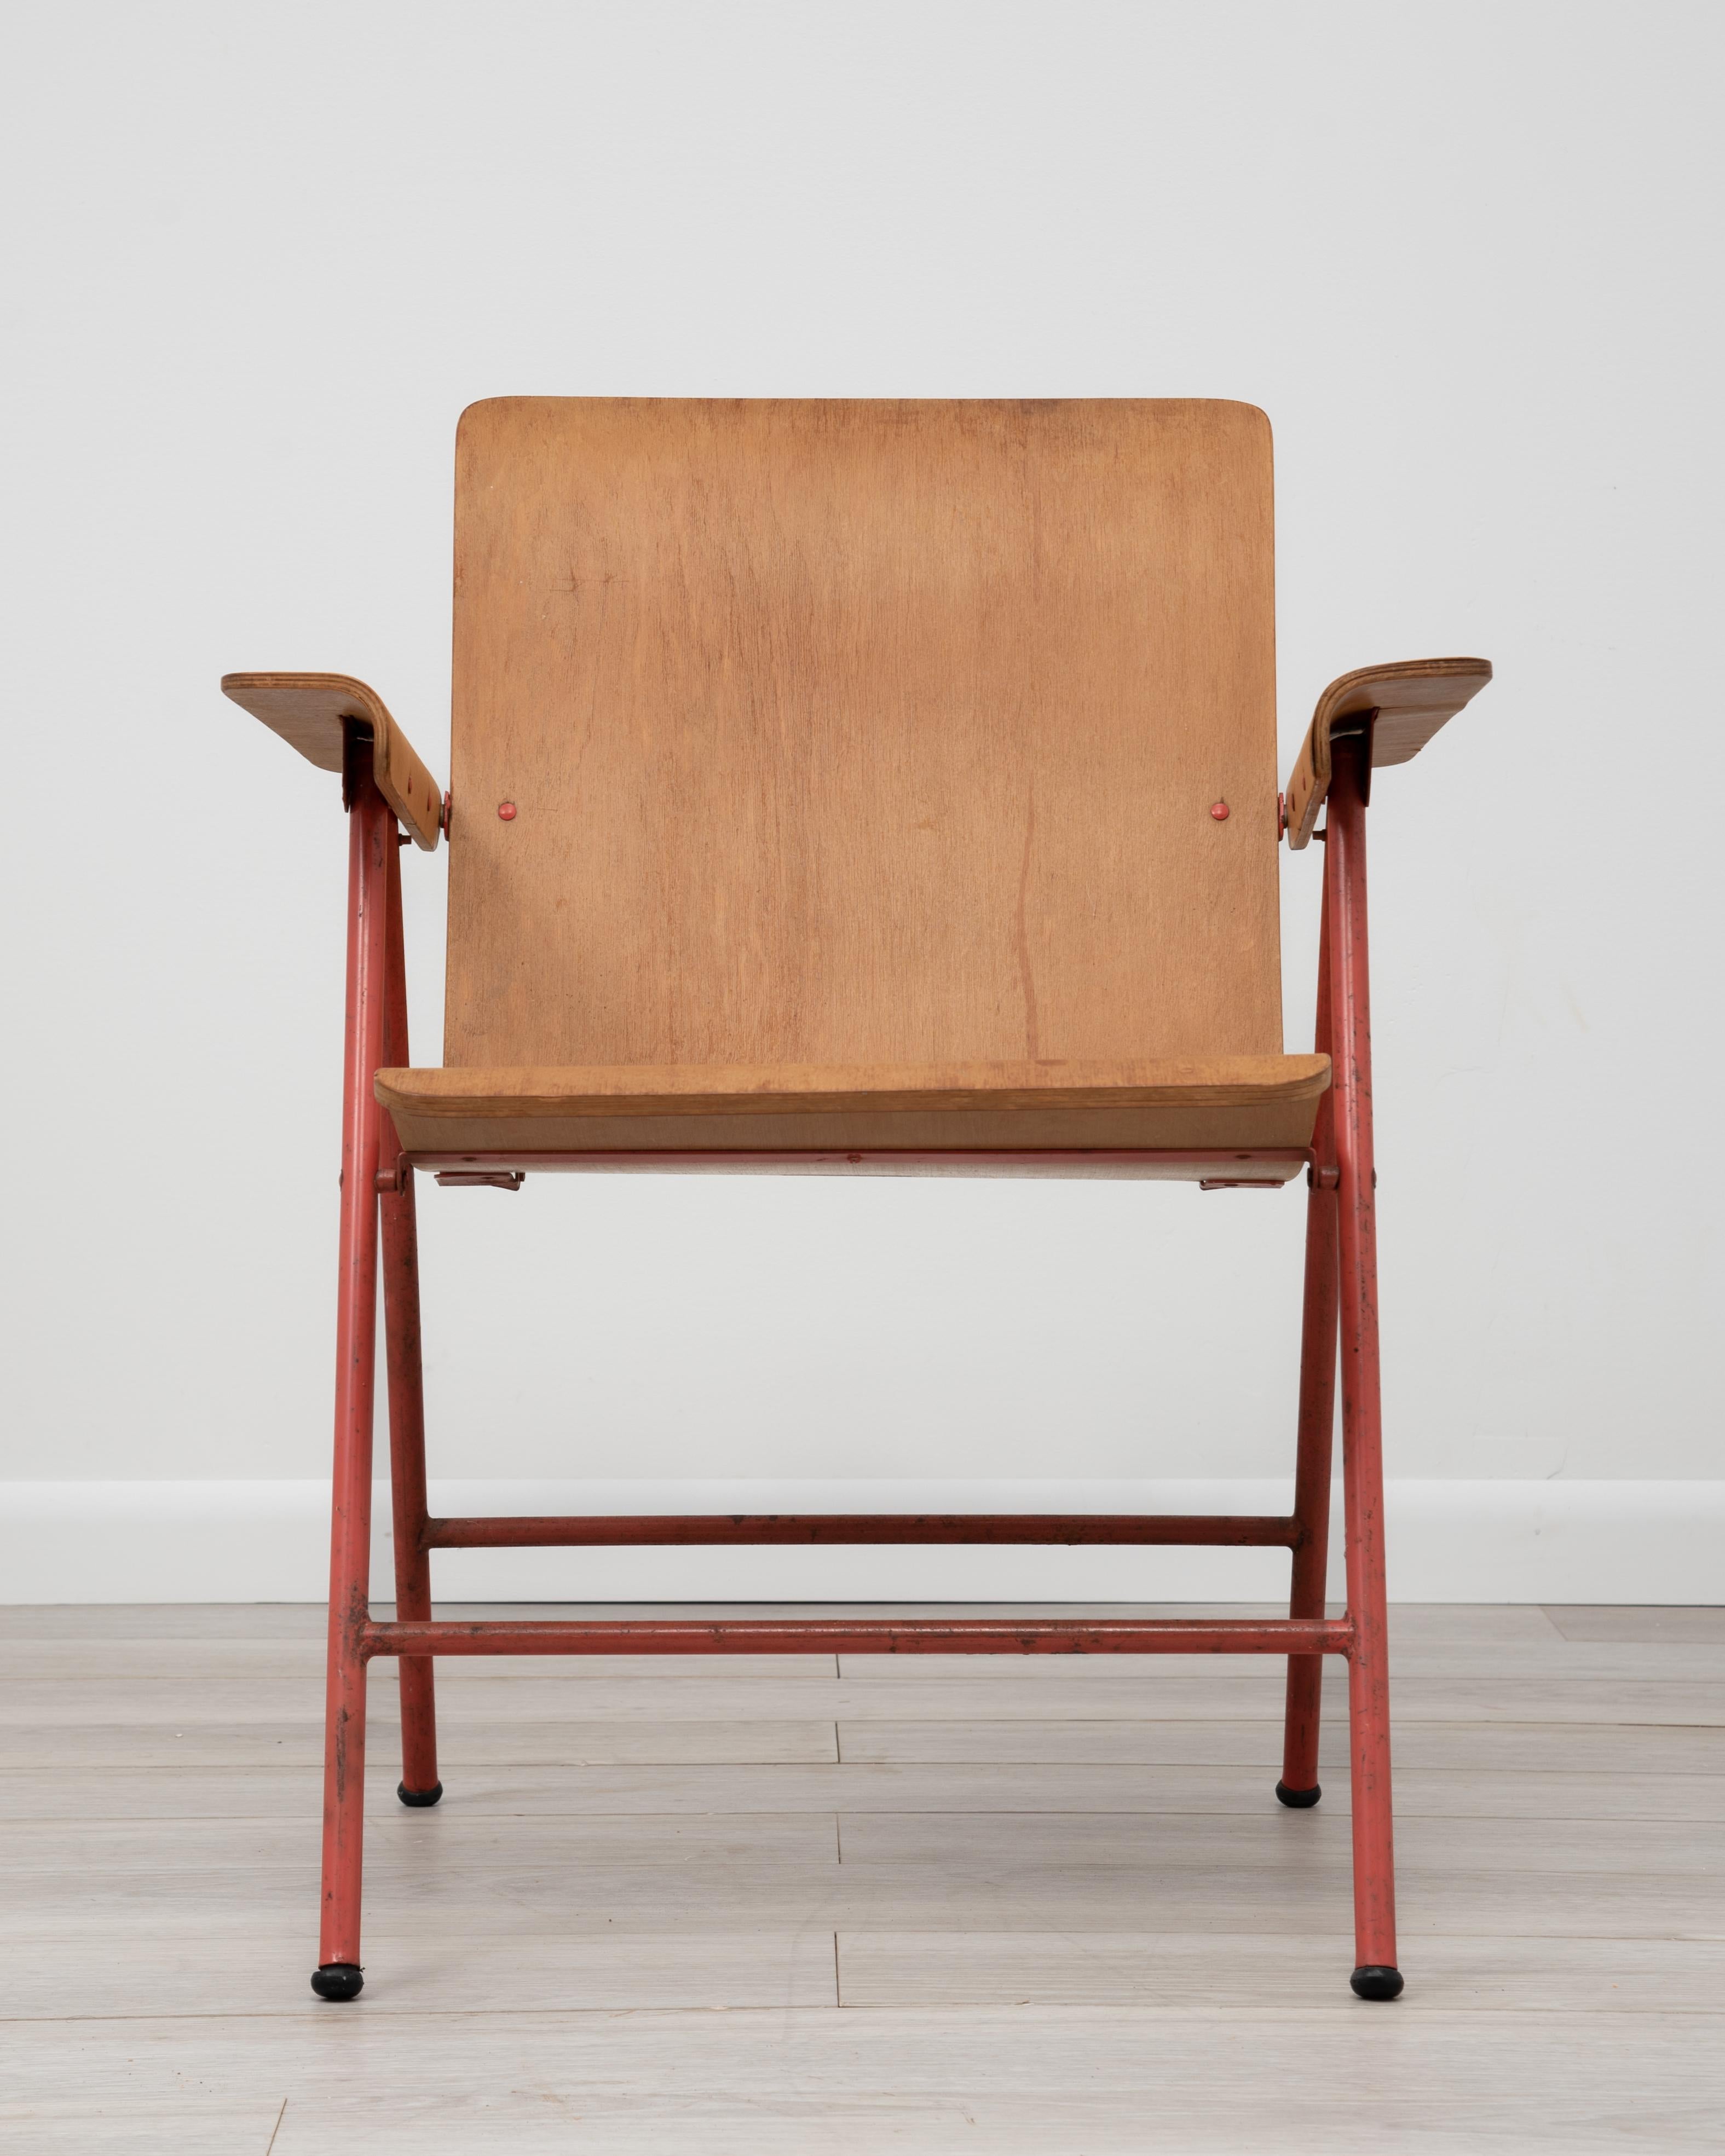 A single plywood and salmon color enameled iron folding armchair designed by Russel Wright for Shwayder Bros Inc. Signed with decal manufacturer's label to underside: [Samson Chairs Made in USA Shwayder Bros. Inc Samson Folding Tables Samsonite